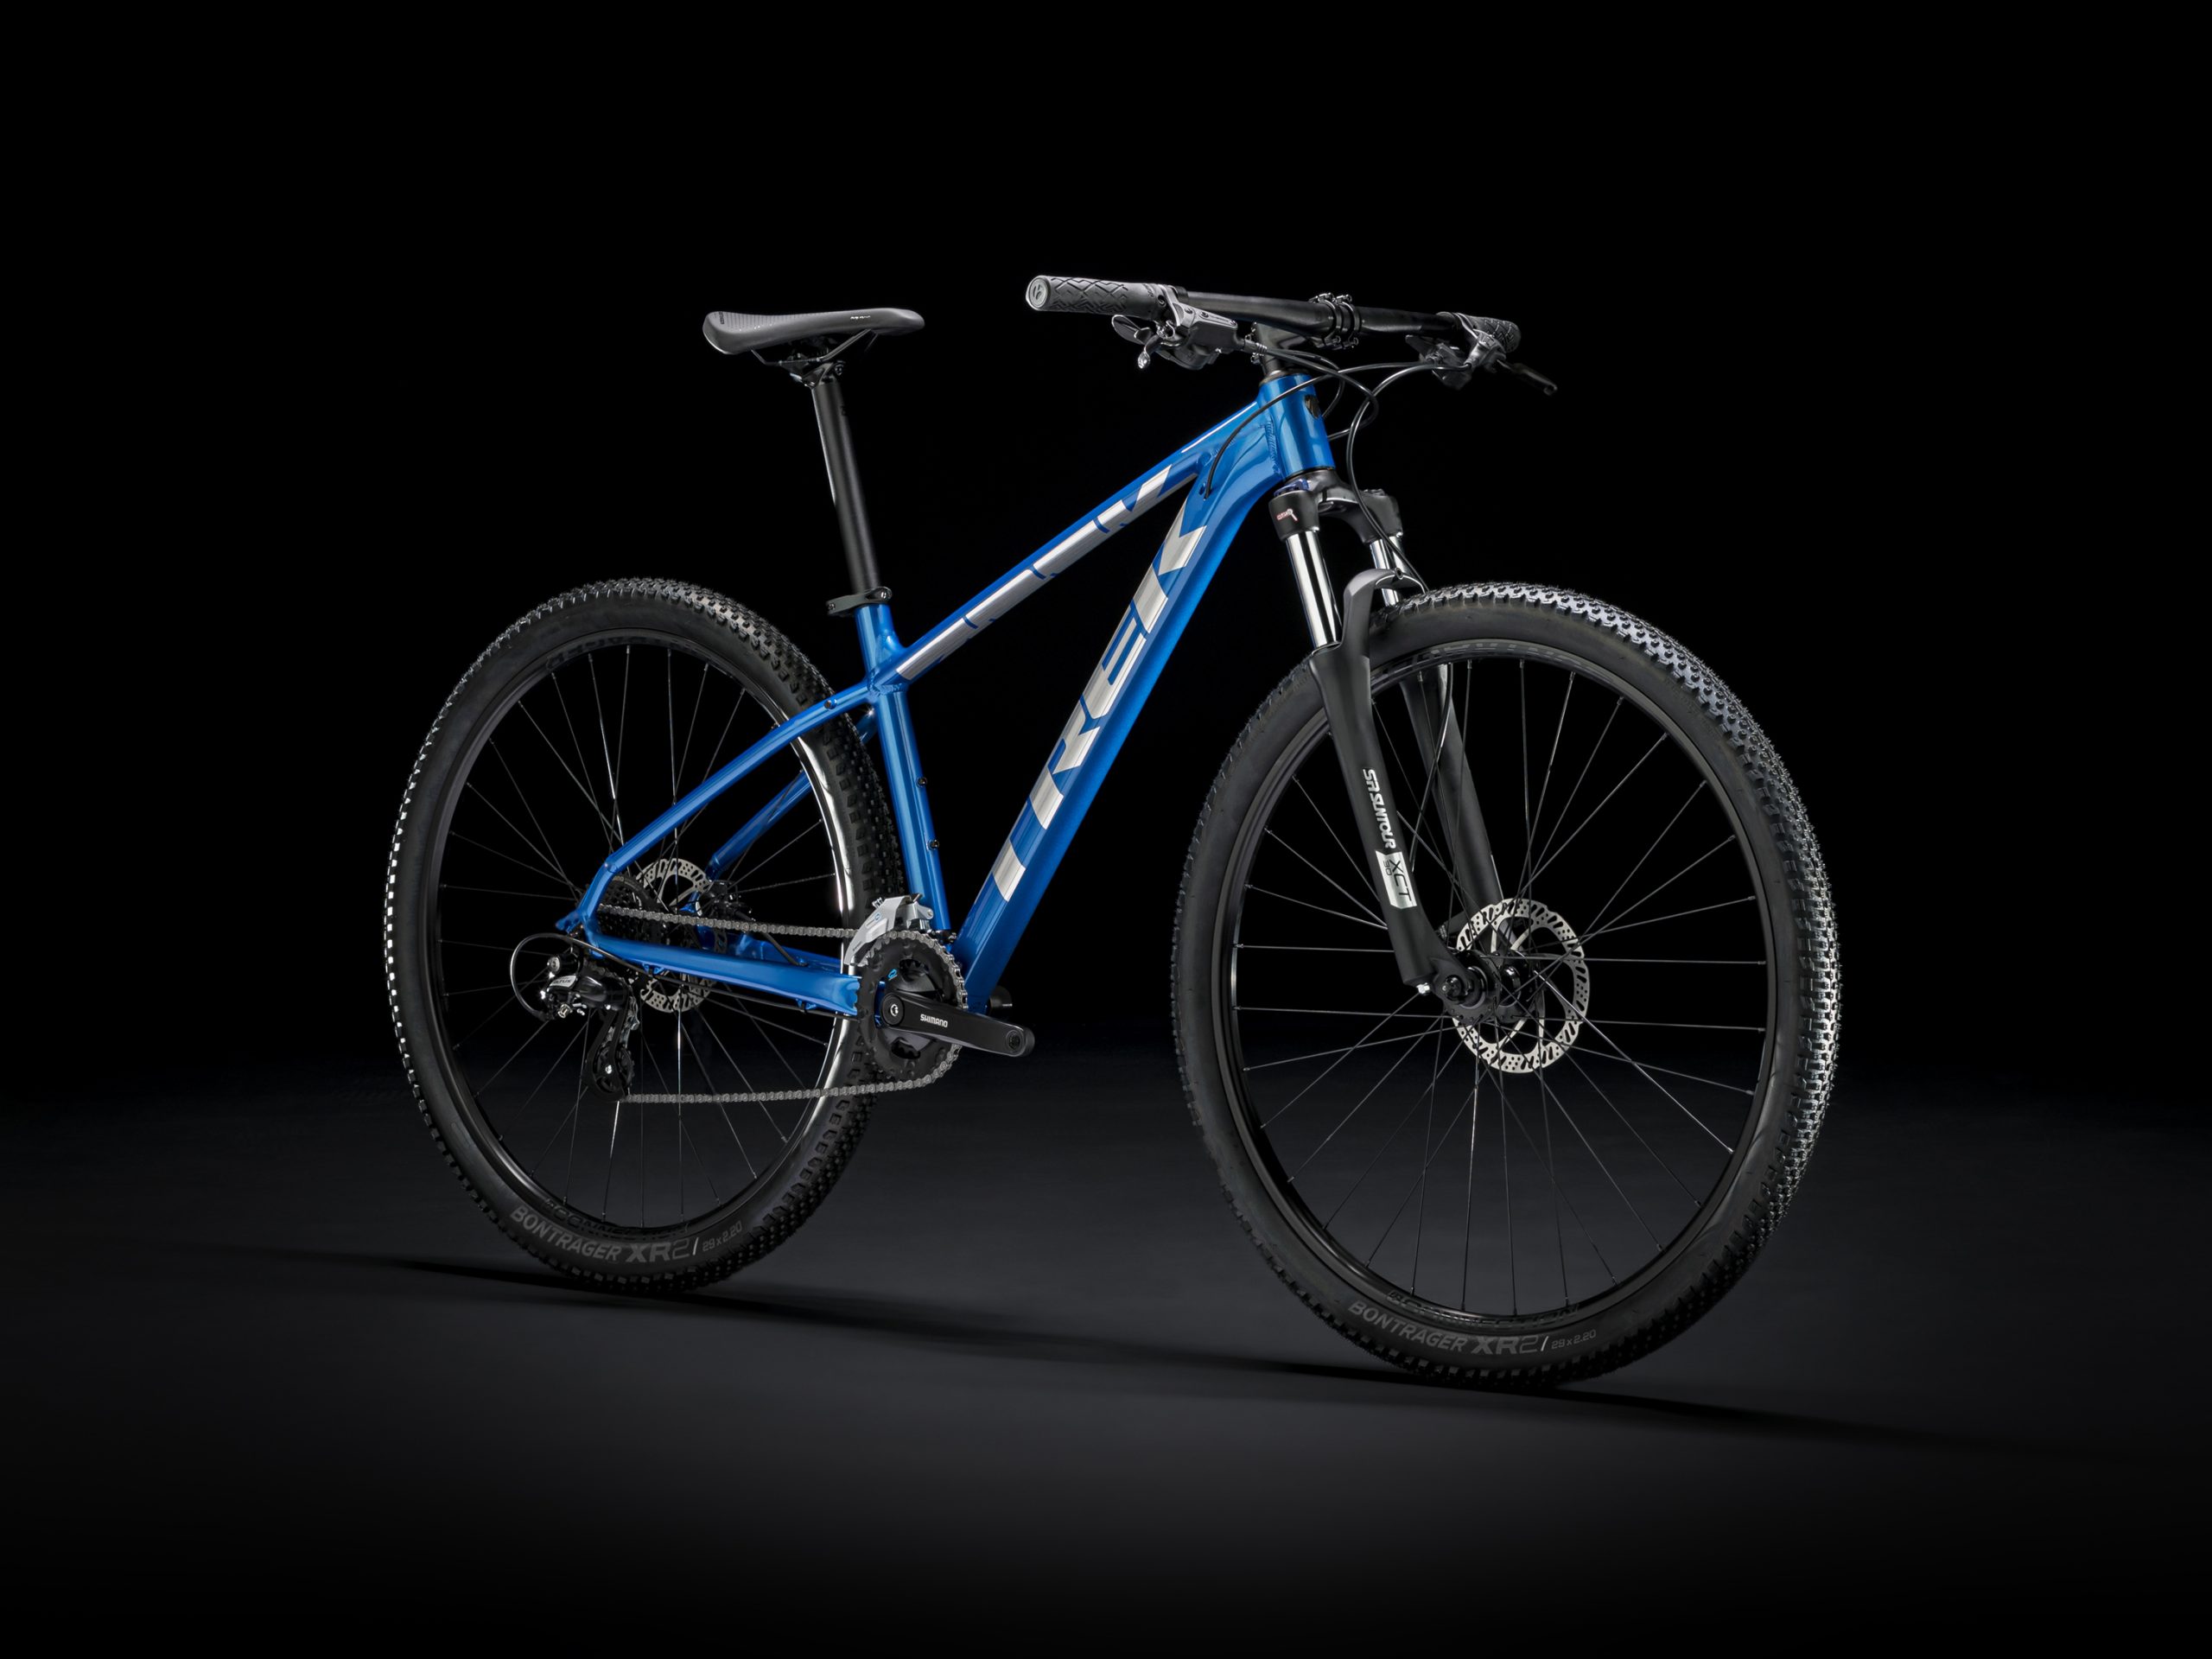 Review Of Trek Marlin Is It Worth The Money? | lupon.gov.ph